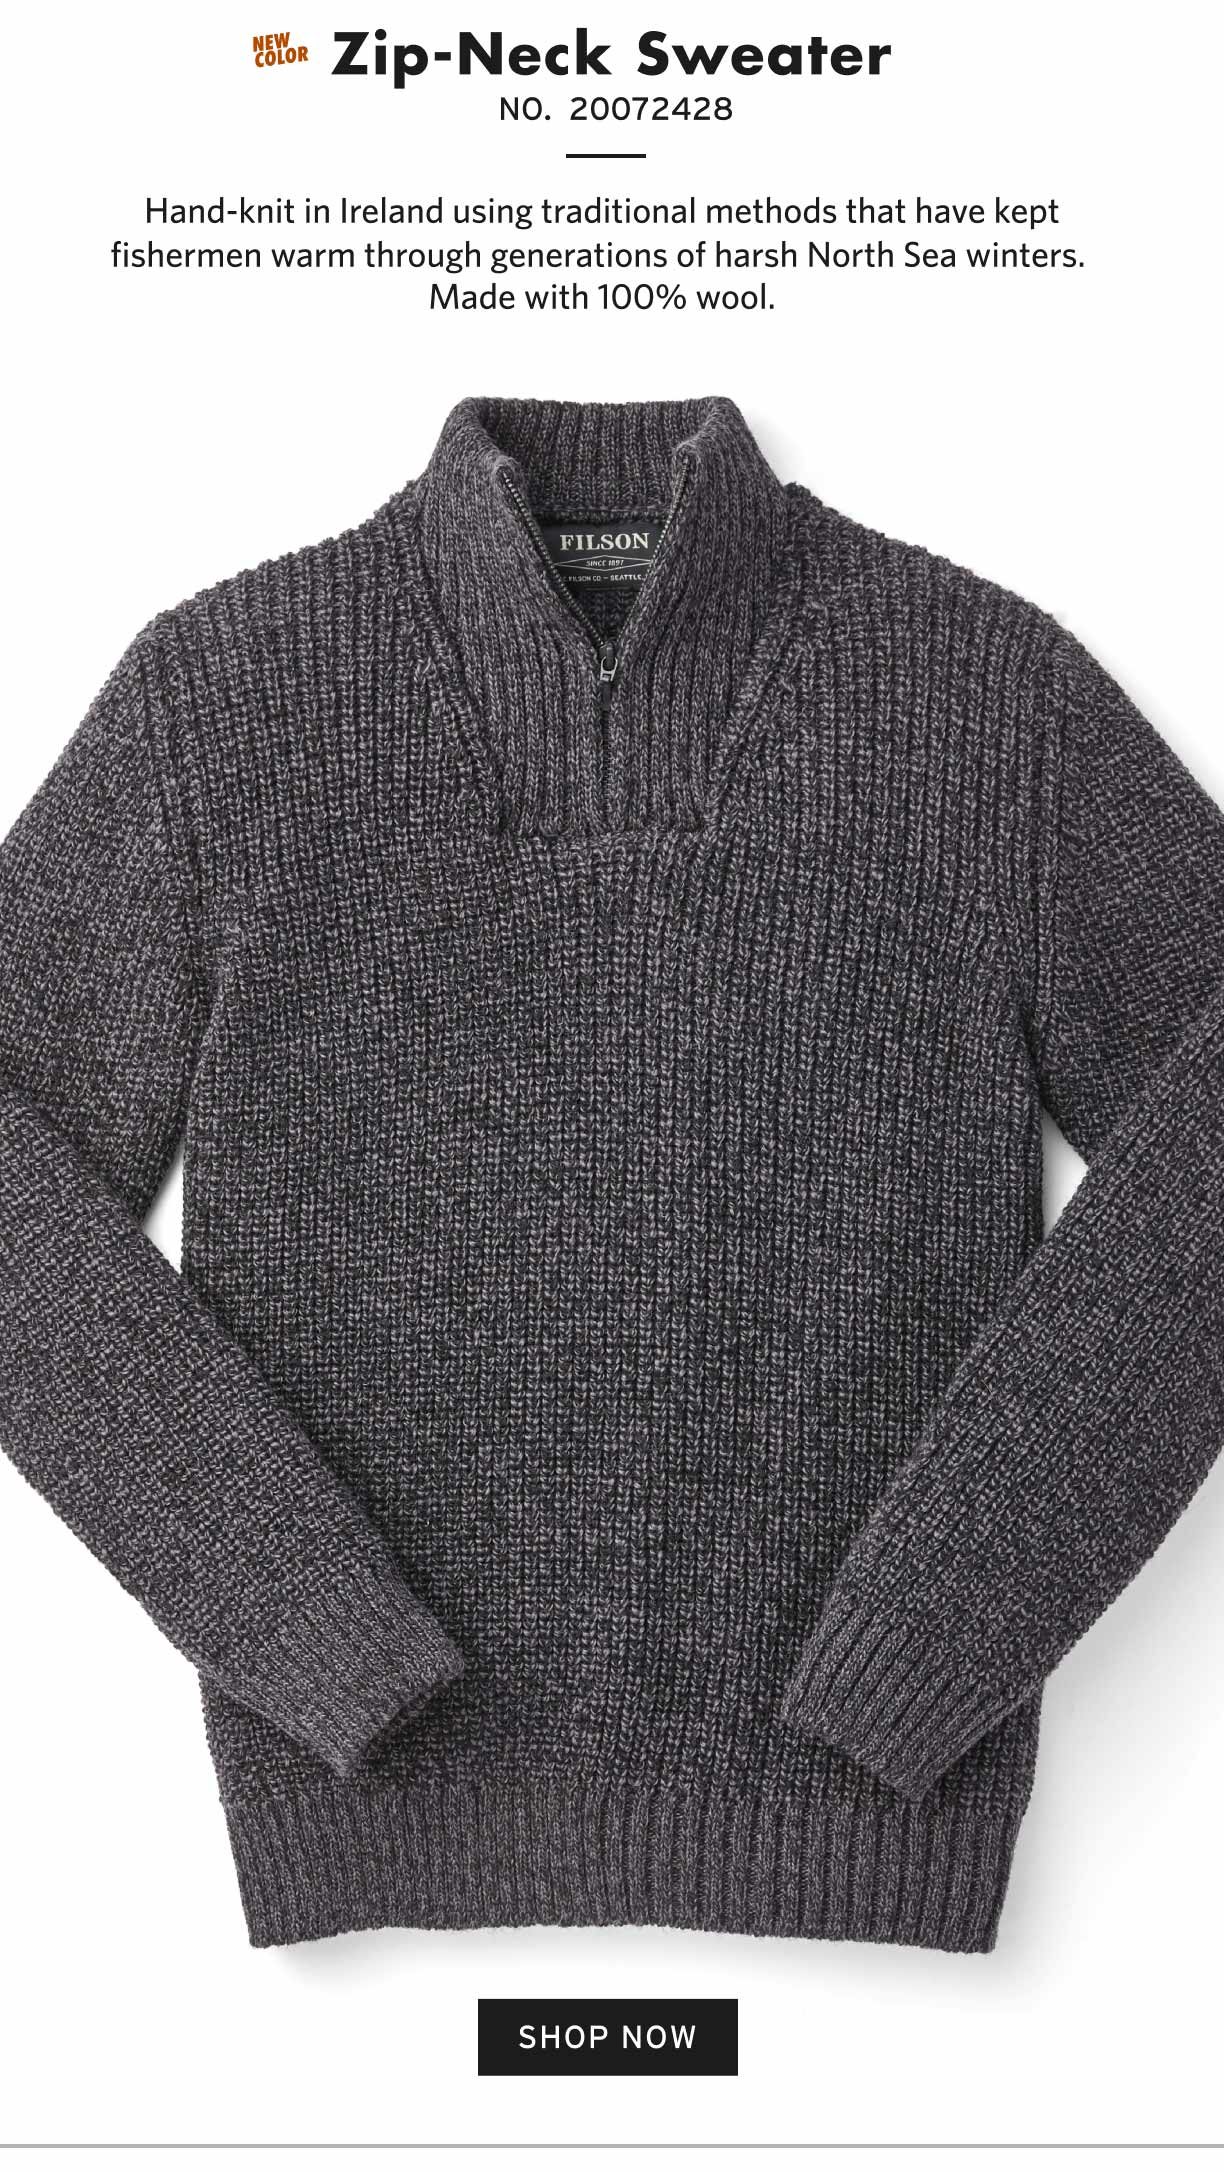 SHOP MENS SWEATERS